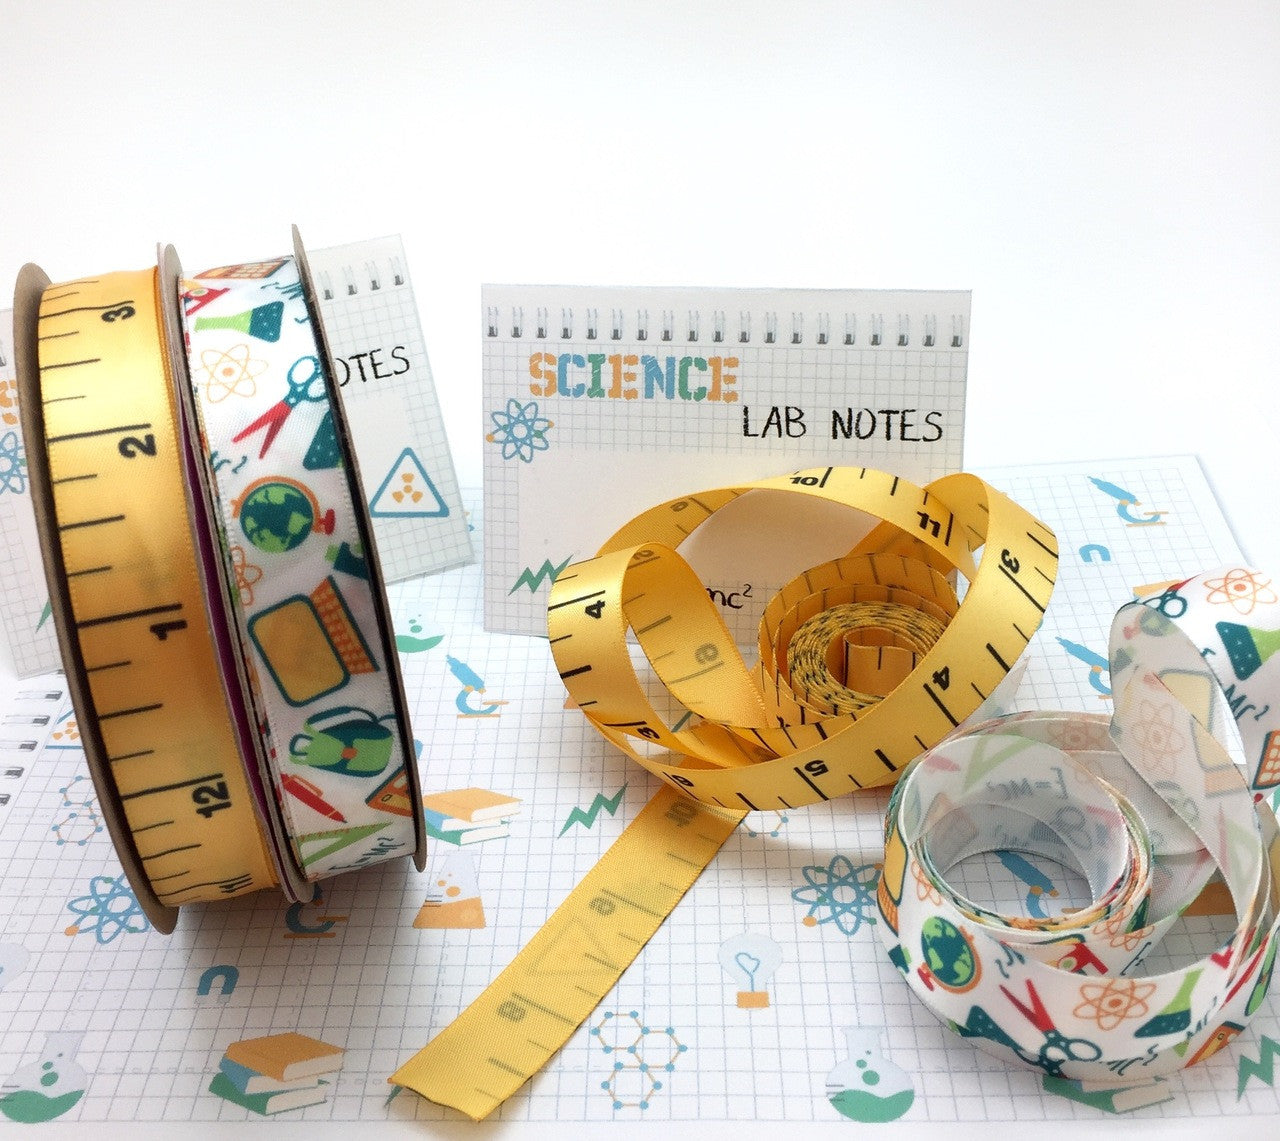 Math and science rule! Our fun science ribbon will be a big hit with your science teacher at the end of year science party!